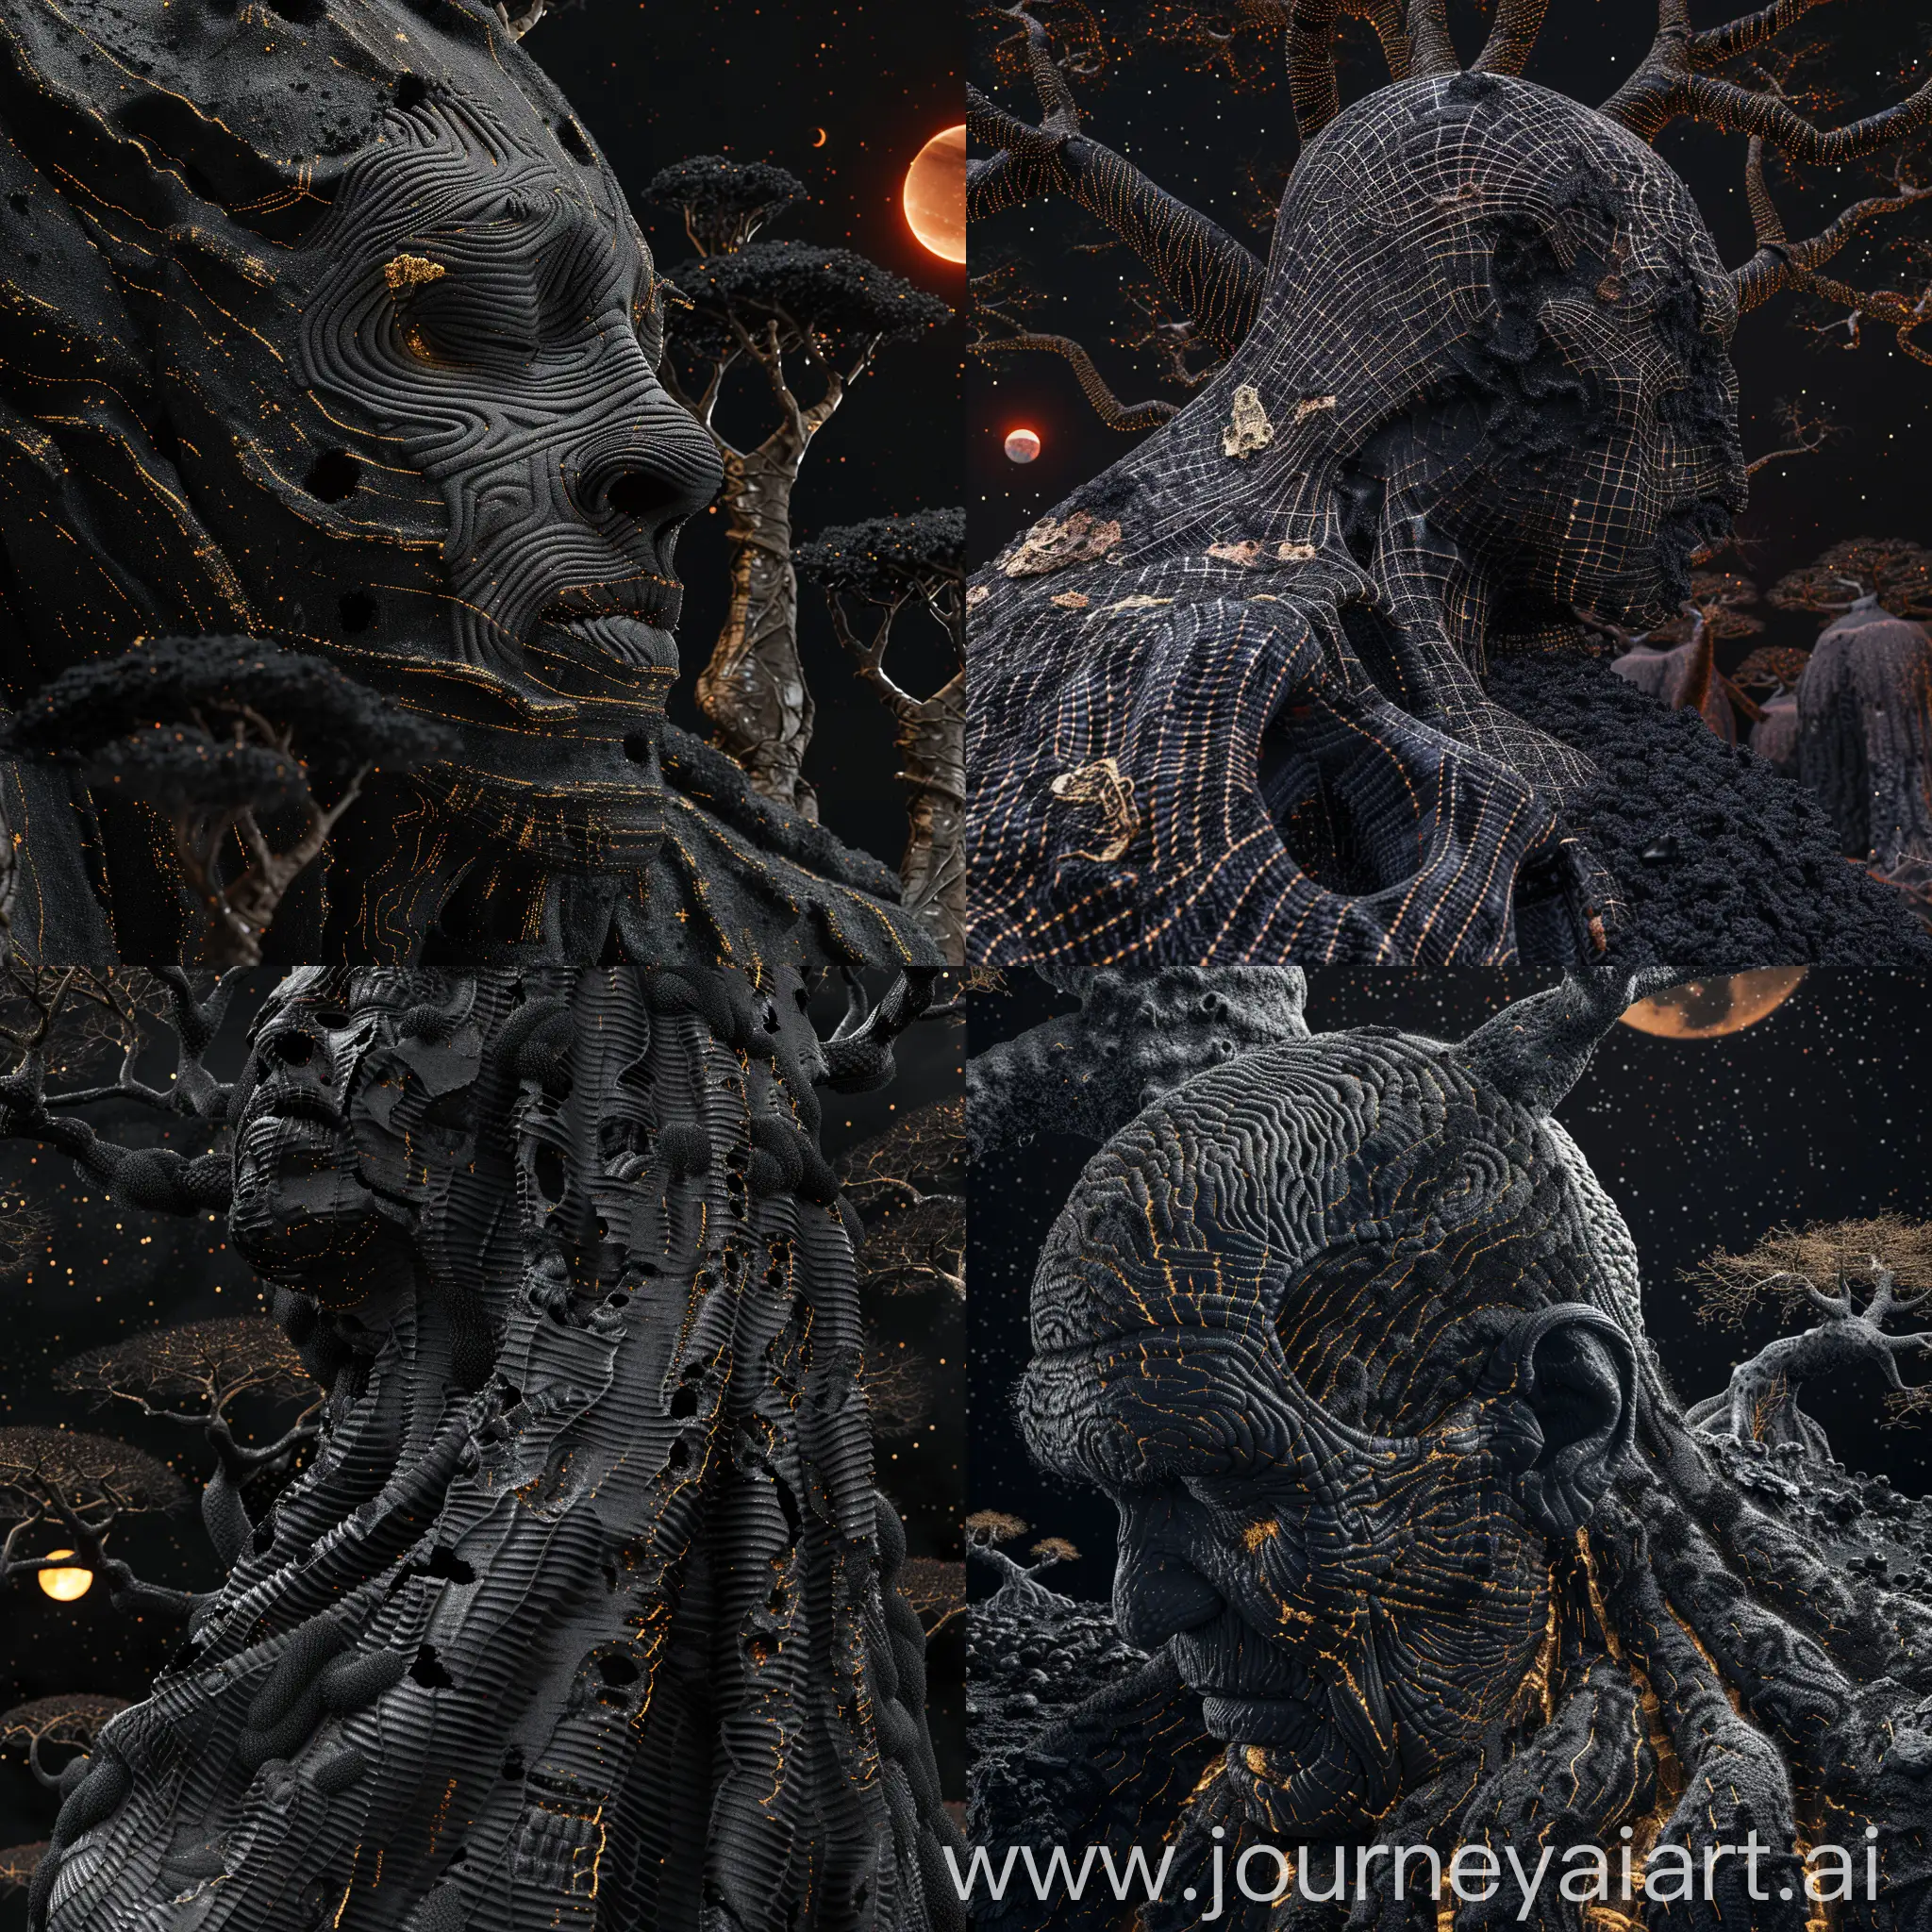 lonely soul of a close-up giant in a toga of suffering made of membranes of furrows and carbon-kevlar, night black sky, necrogriffin rocks in black-coal sands, huge baobab trees, open space, crimson moon, palette black black coal black woolen threads, pattern with black coal and gold, Ray Tracing Global Illumination, Optics, Scattering, Glow, insanely detailed and intricate,superdetailed,Hyper detailed